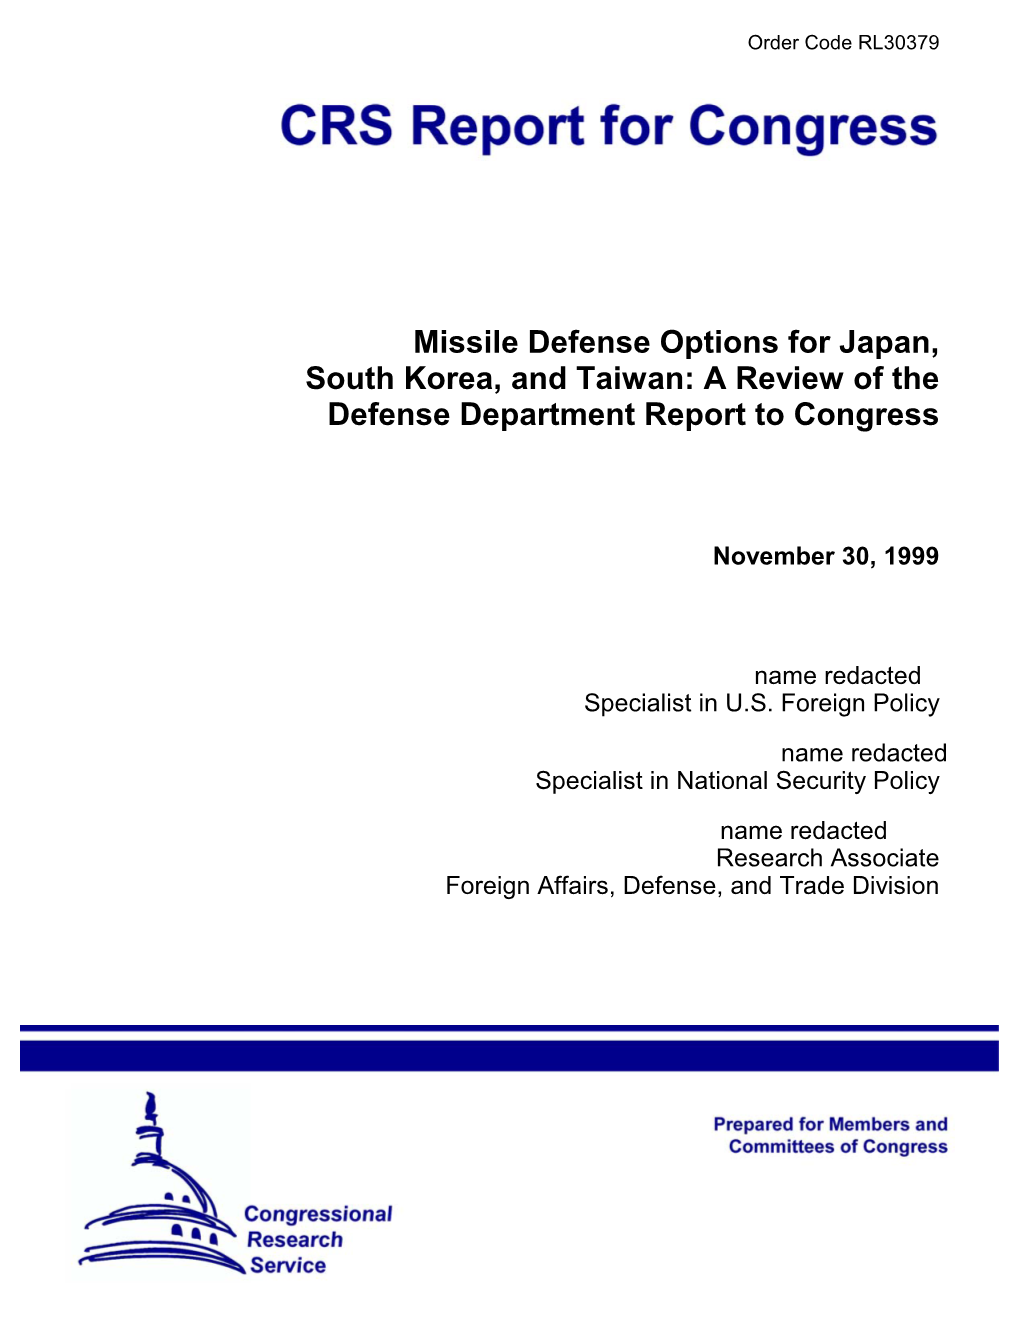 Missile Defense Options for Japan, South Korea, and Taiwan: a Review of the Defense Department Report to Congress